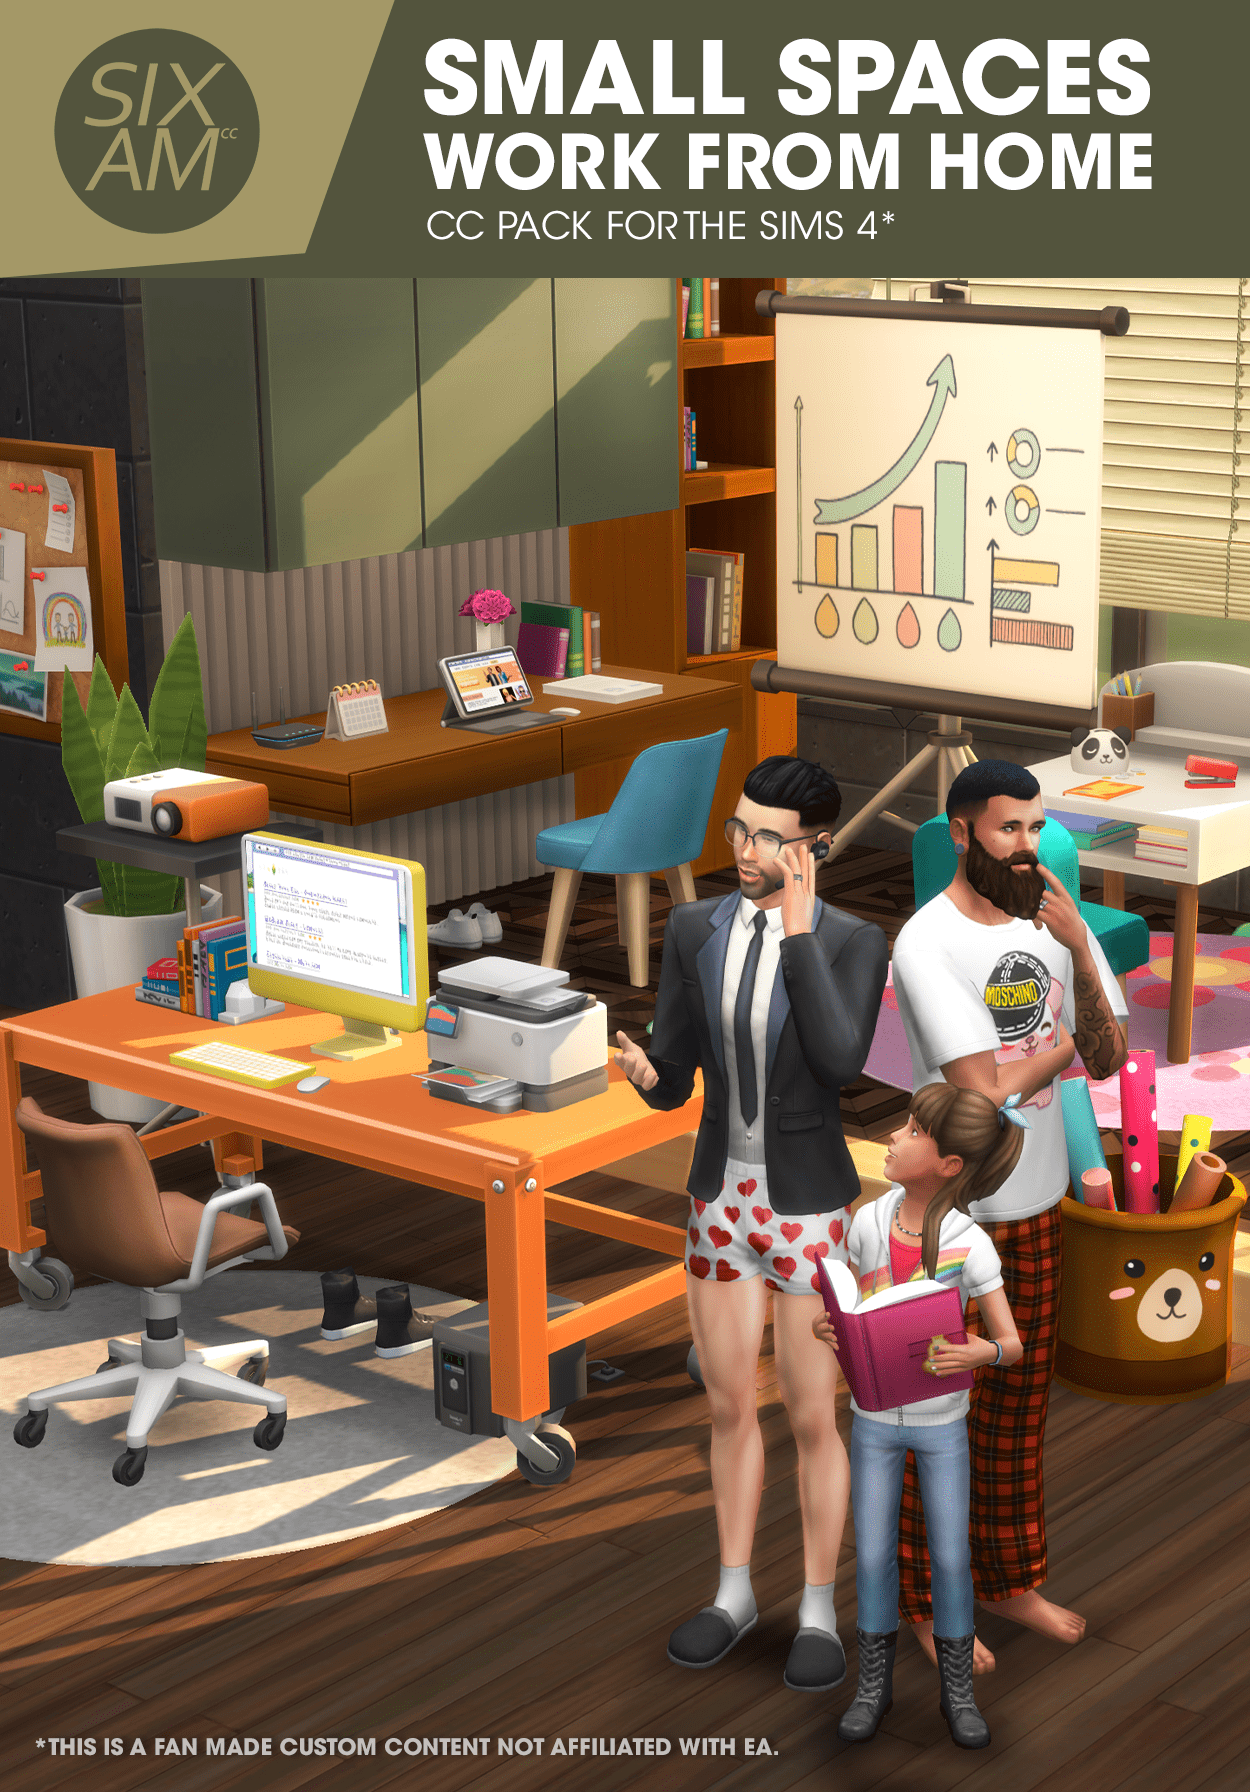 Small Spaces: Work from Home (CC Pack for The Sims 4)